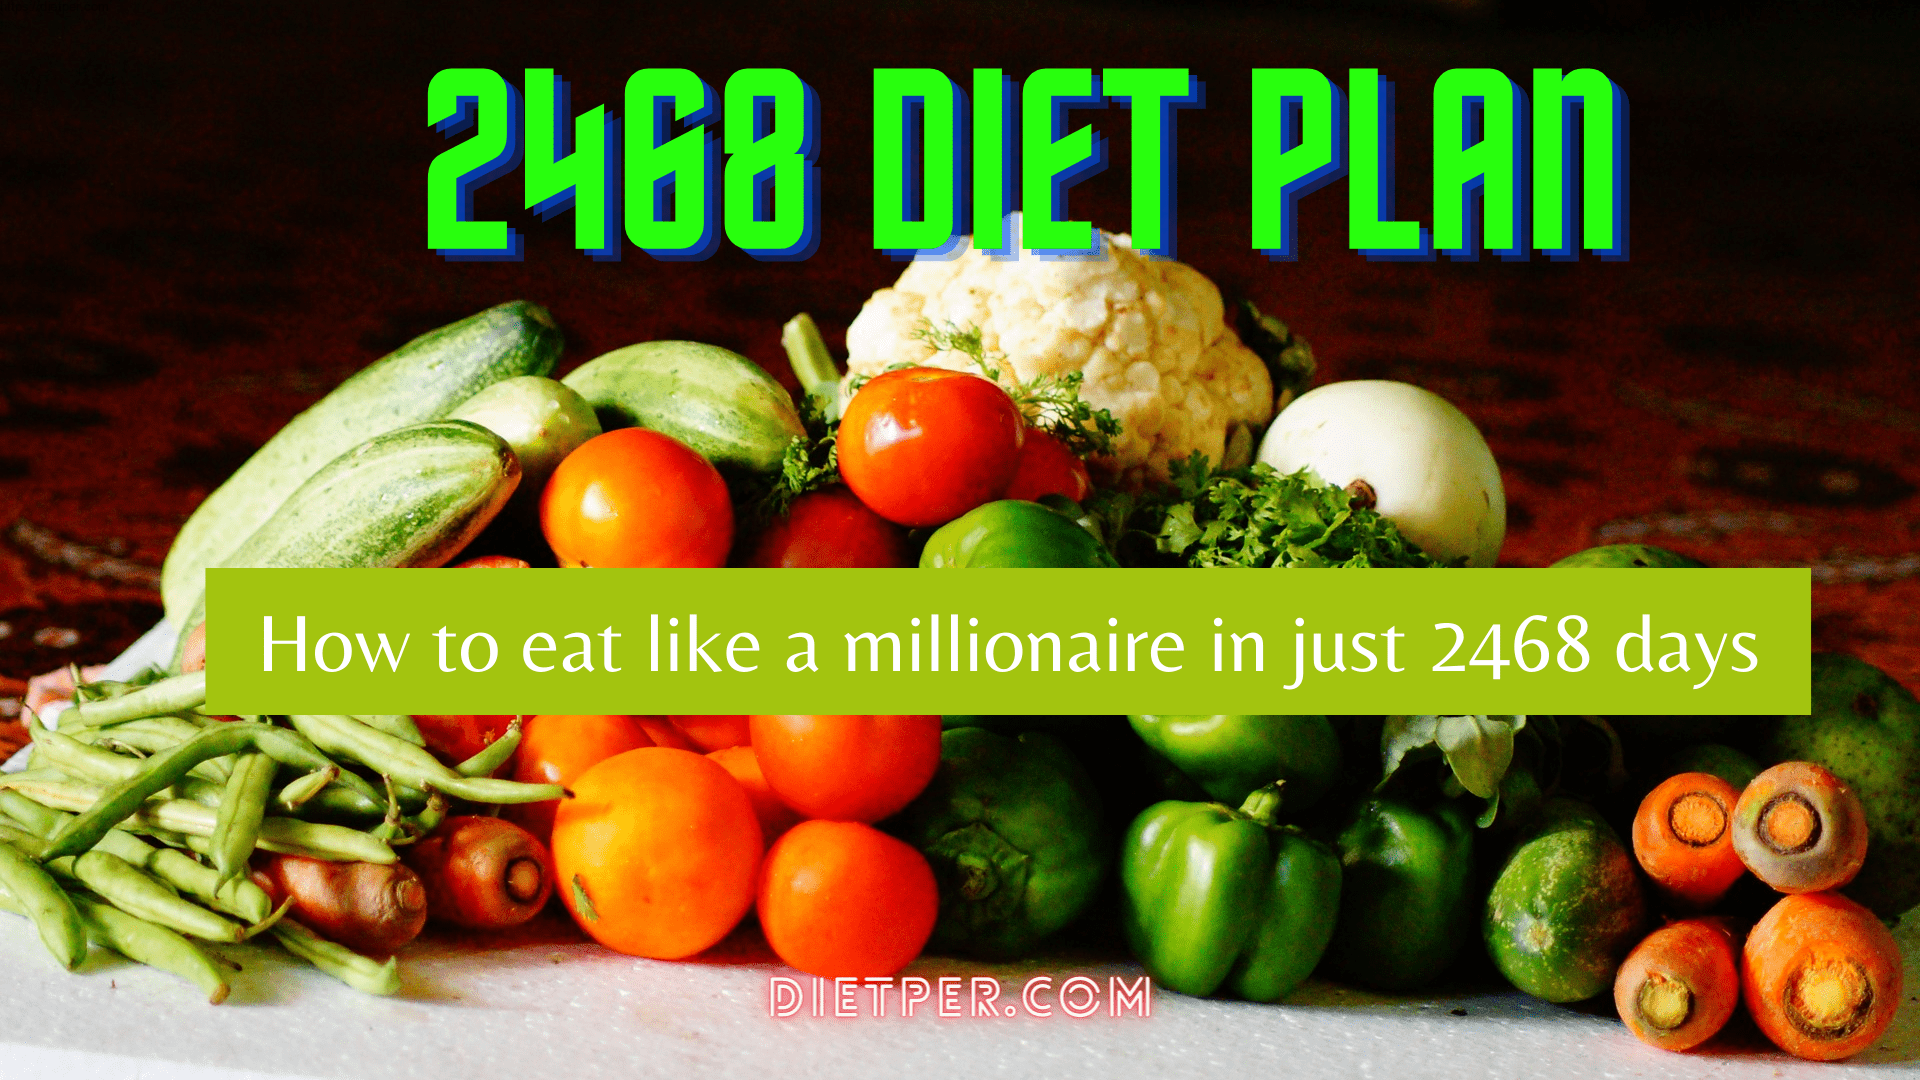 2468 Diet | A Bad Idea and Why